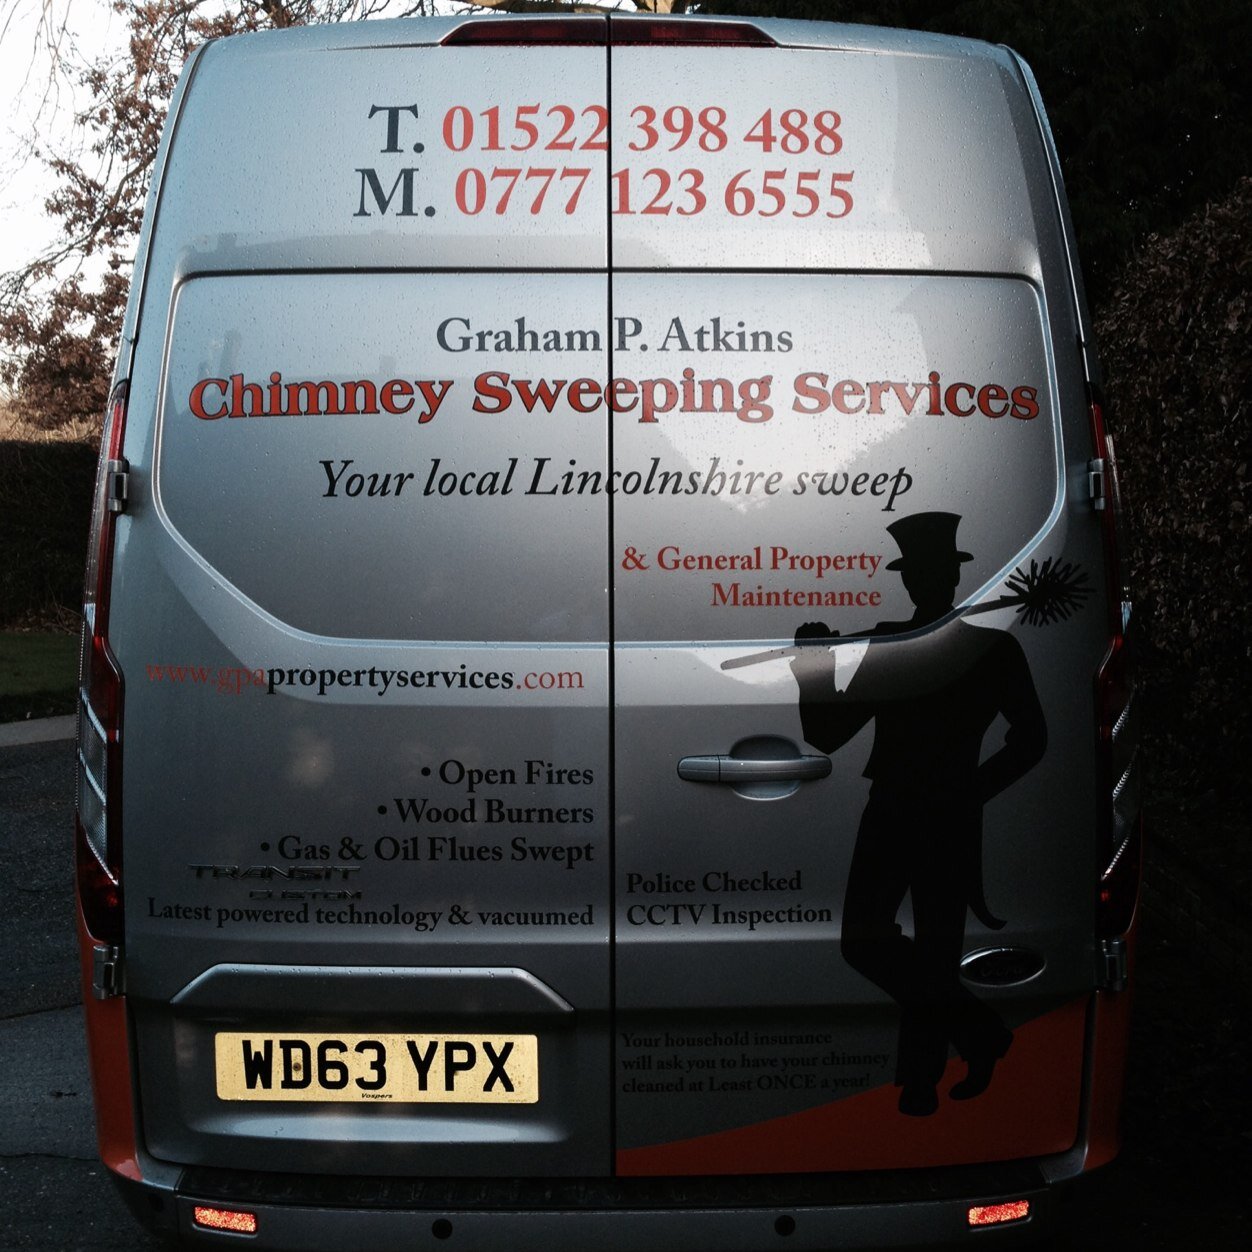 Graham P Atkins chimney sweeping service. I run https://t.co/87qu7X9f4E and I'm from Nettleham Lincoln Lincolnshire. 07771236555 01522 398488